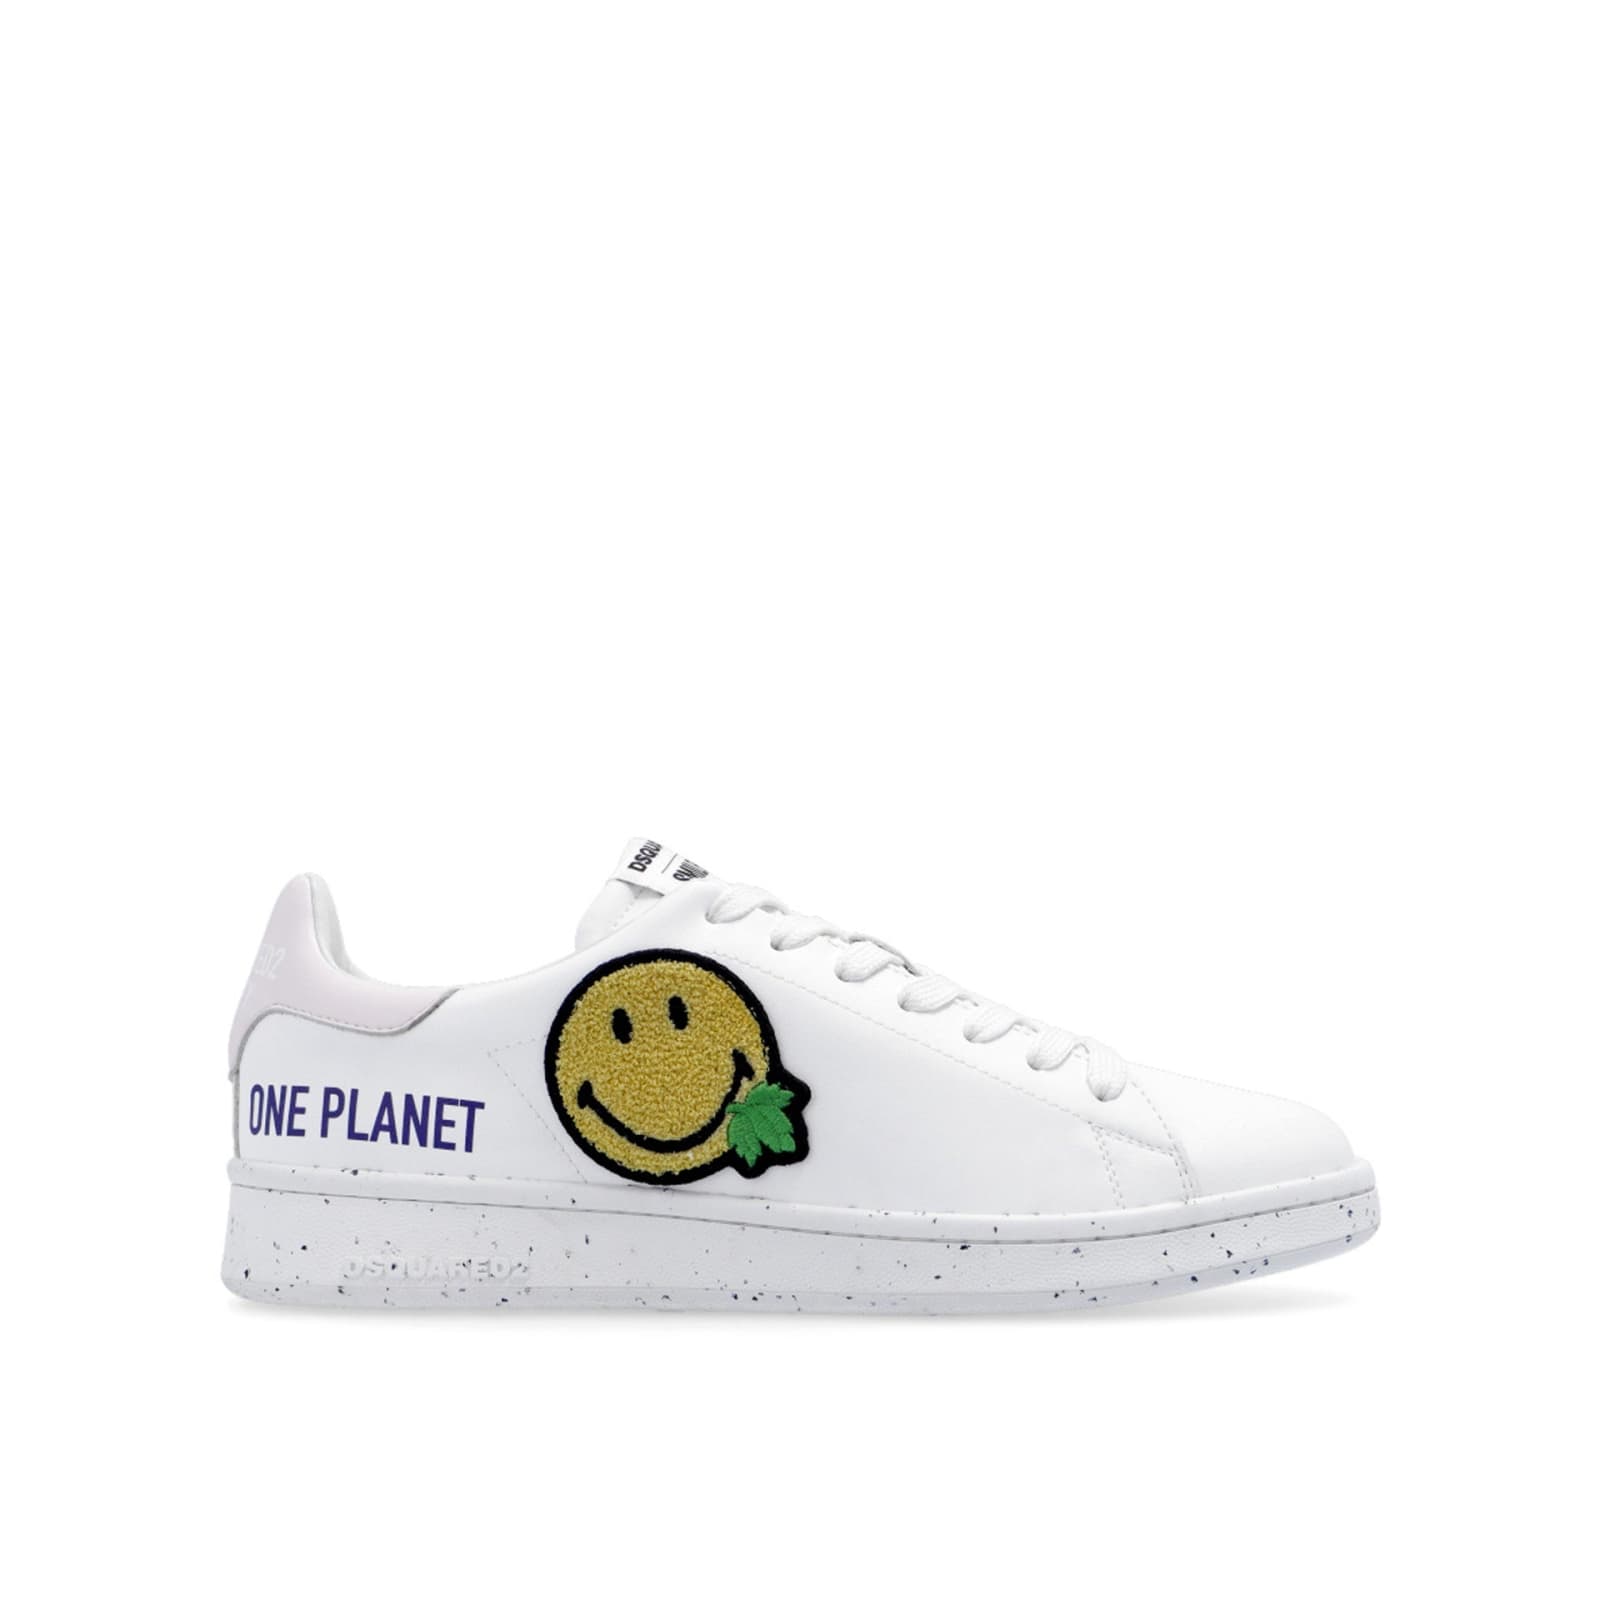 Shop Dsquared2 Smiley Leather Sneakers In White